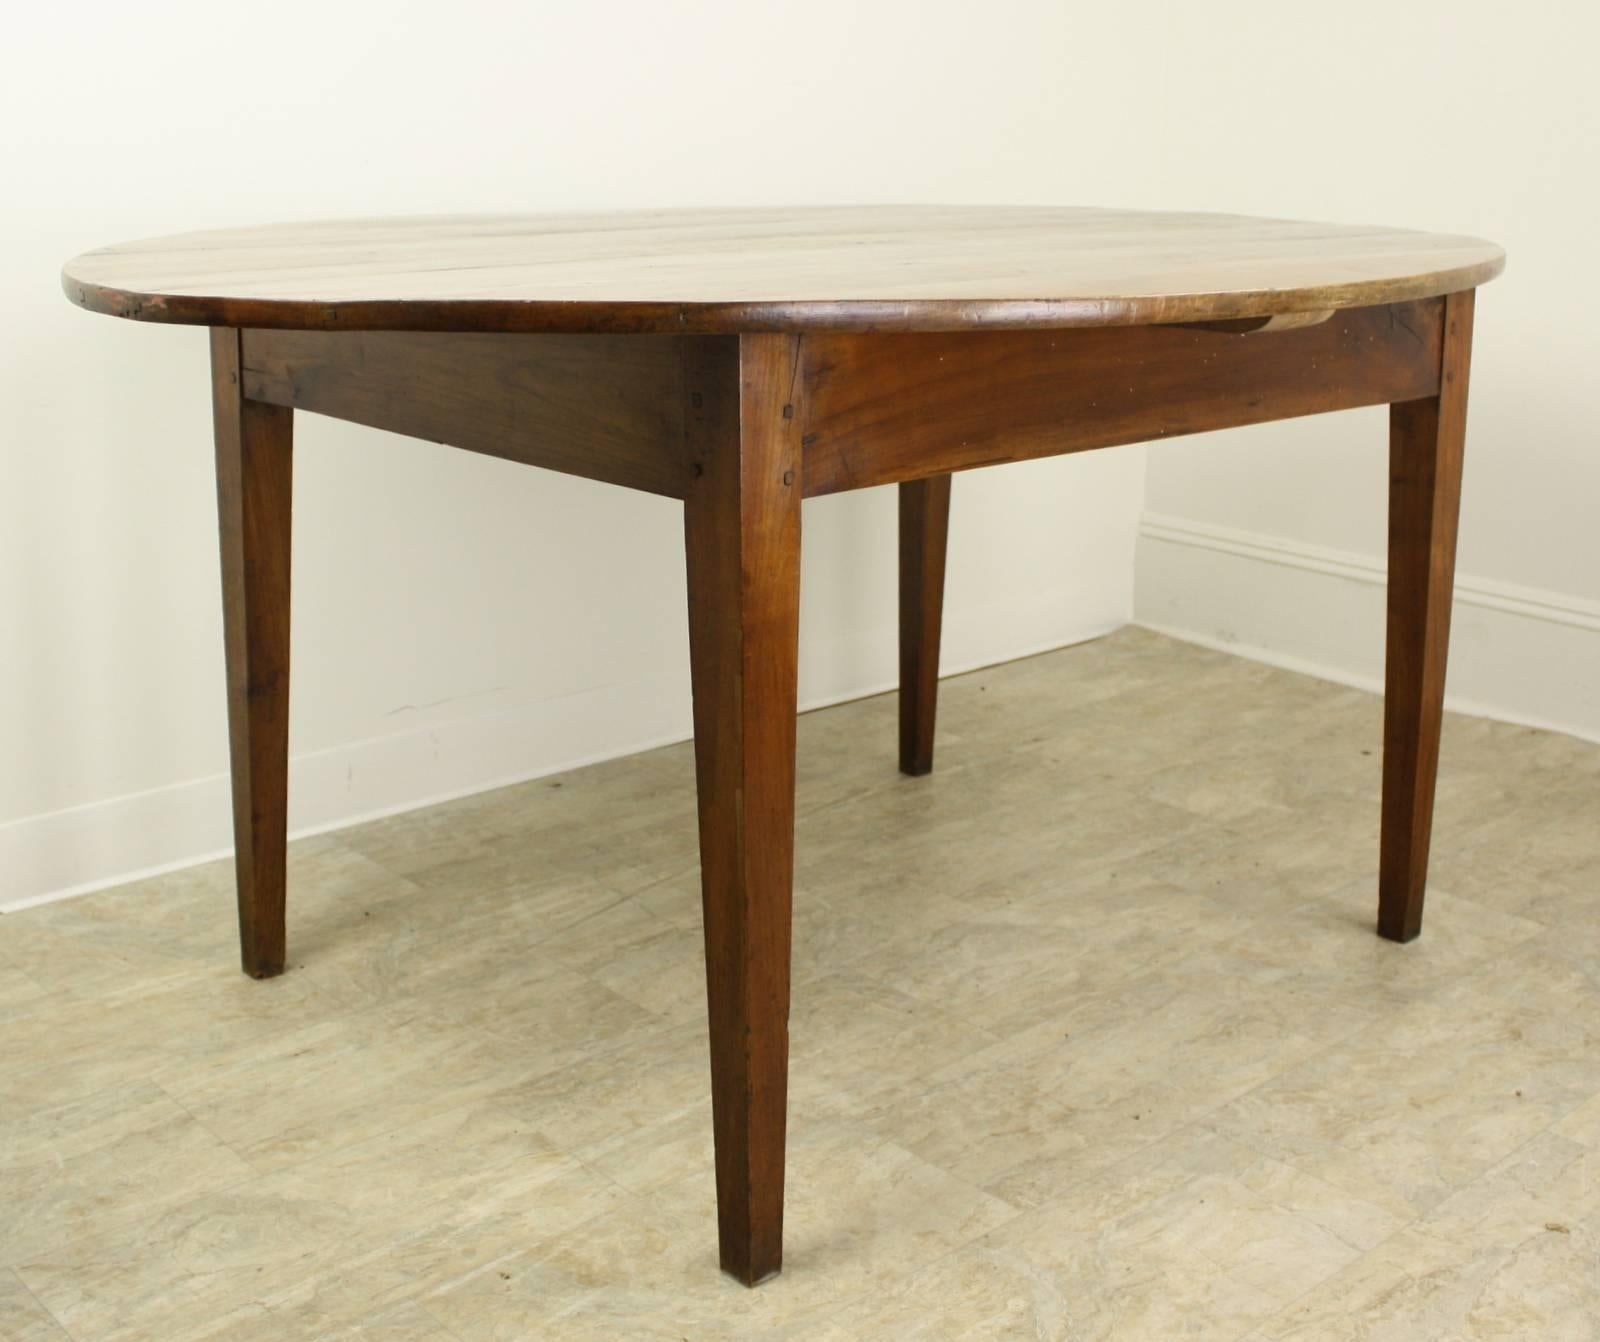 19th Century Antique French Oval Cherry Dining Table